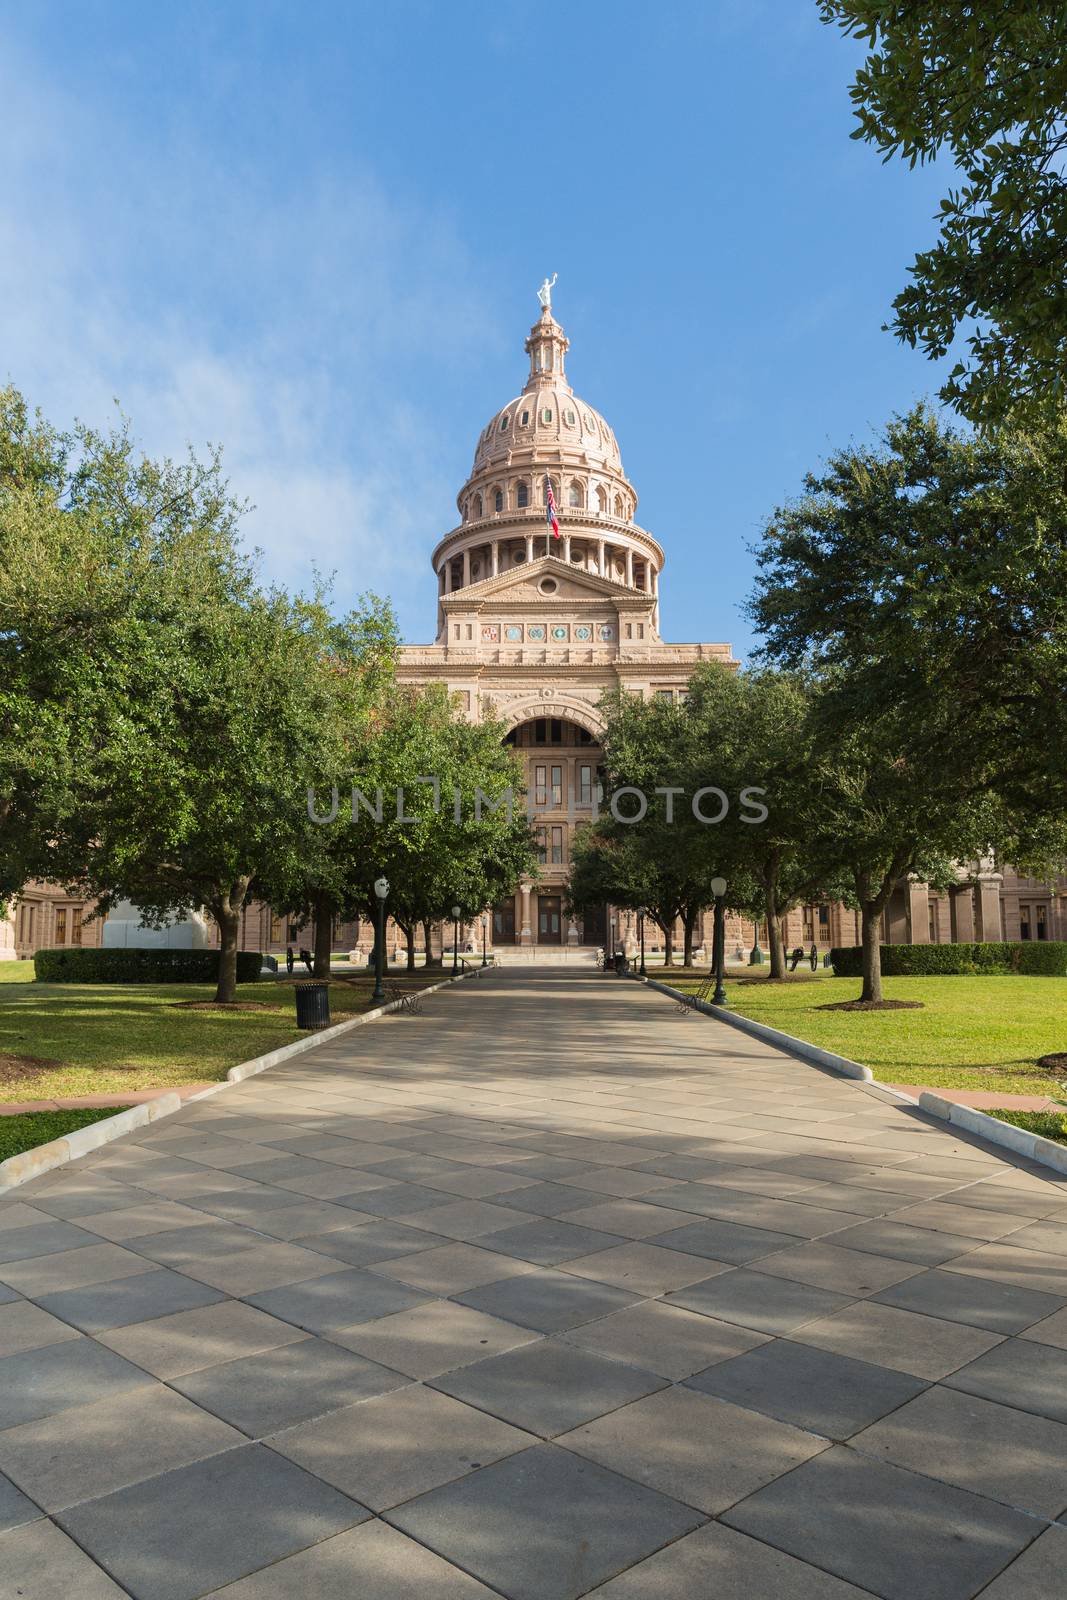 The Capitol Building in Austin Texas by chrisukphoto